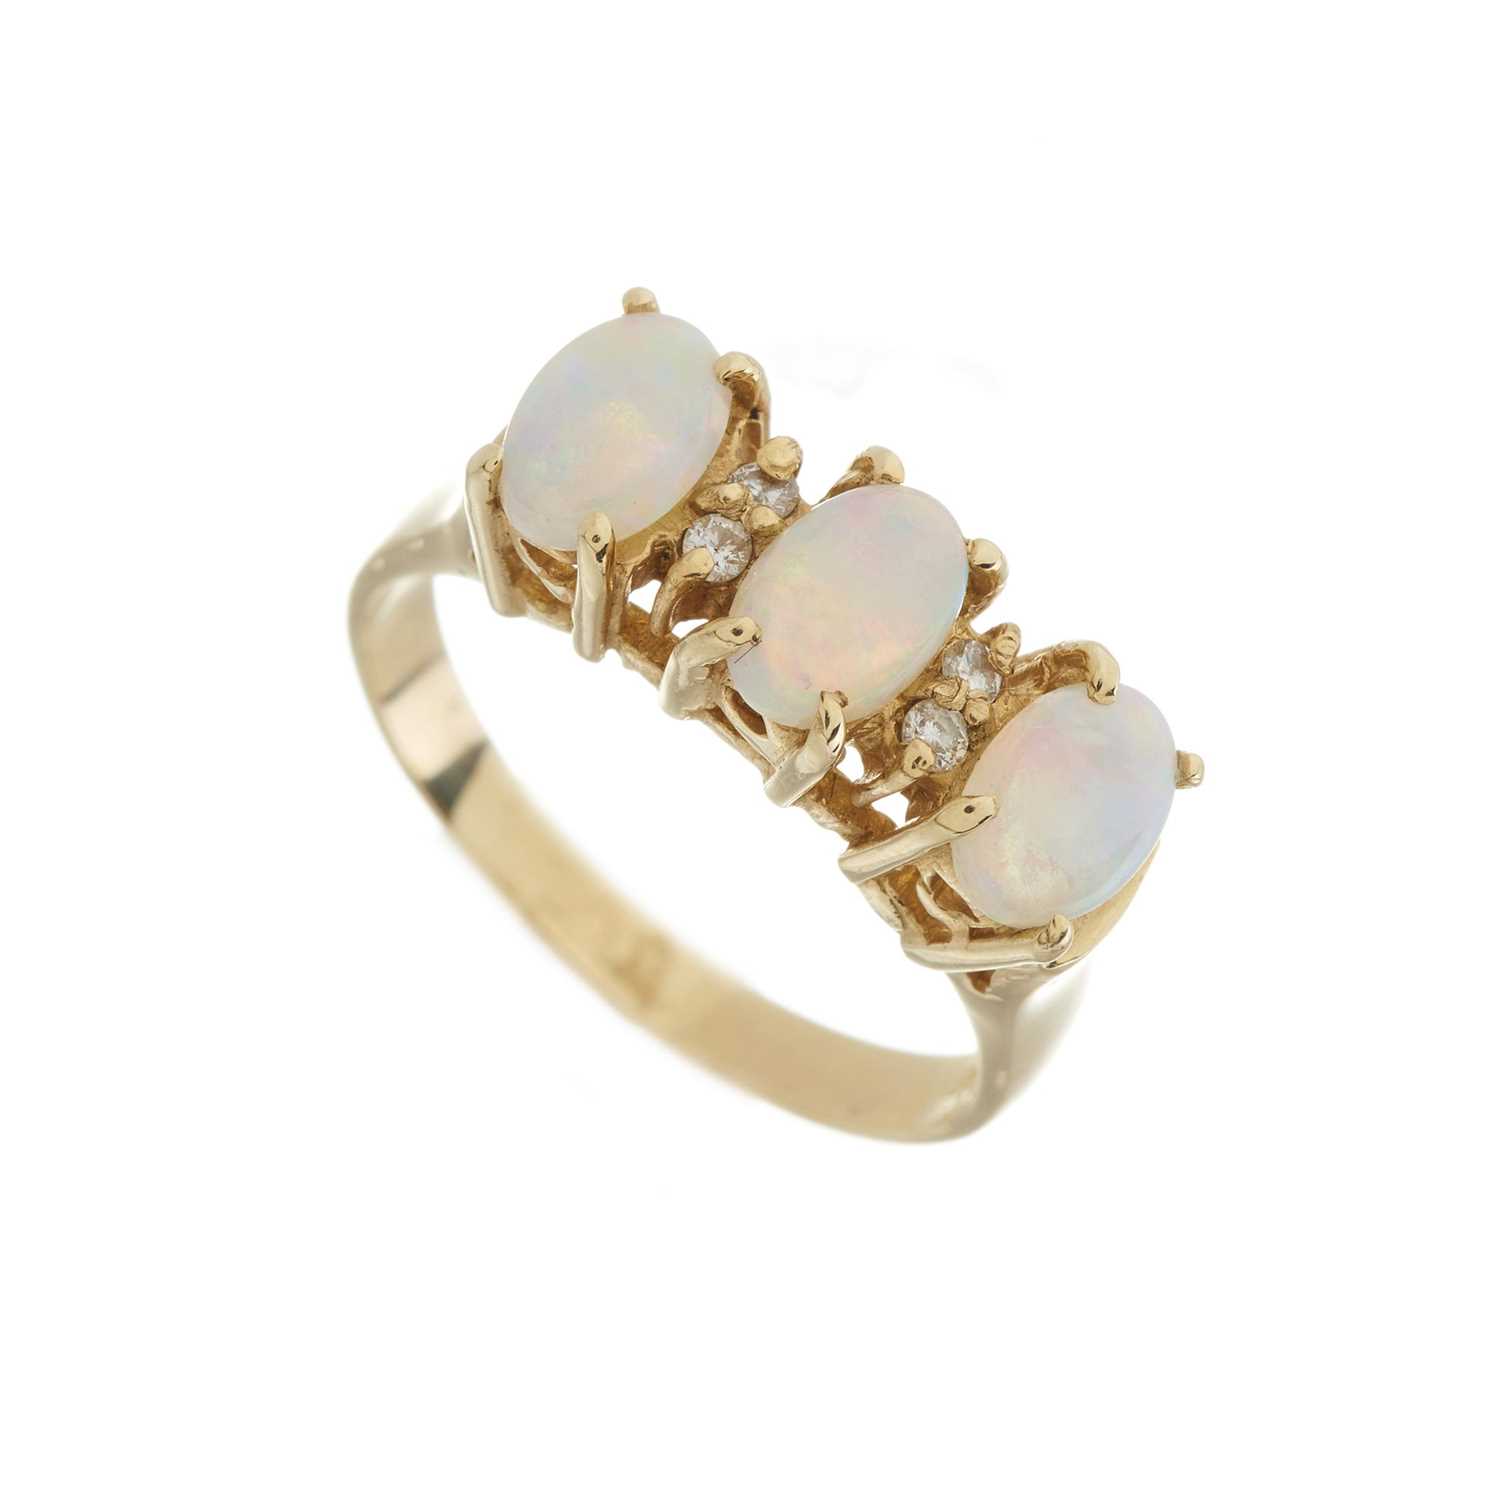 A 14ct gold opal and diamond dress ring - Image 3 of 3